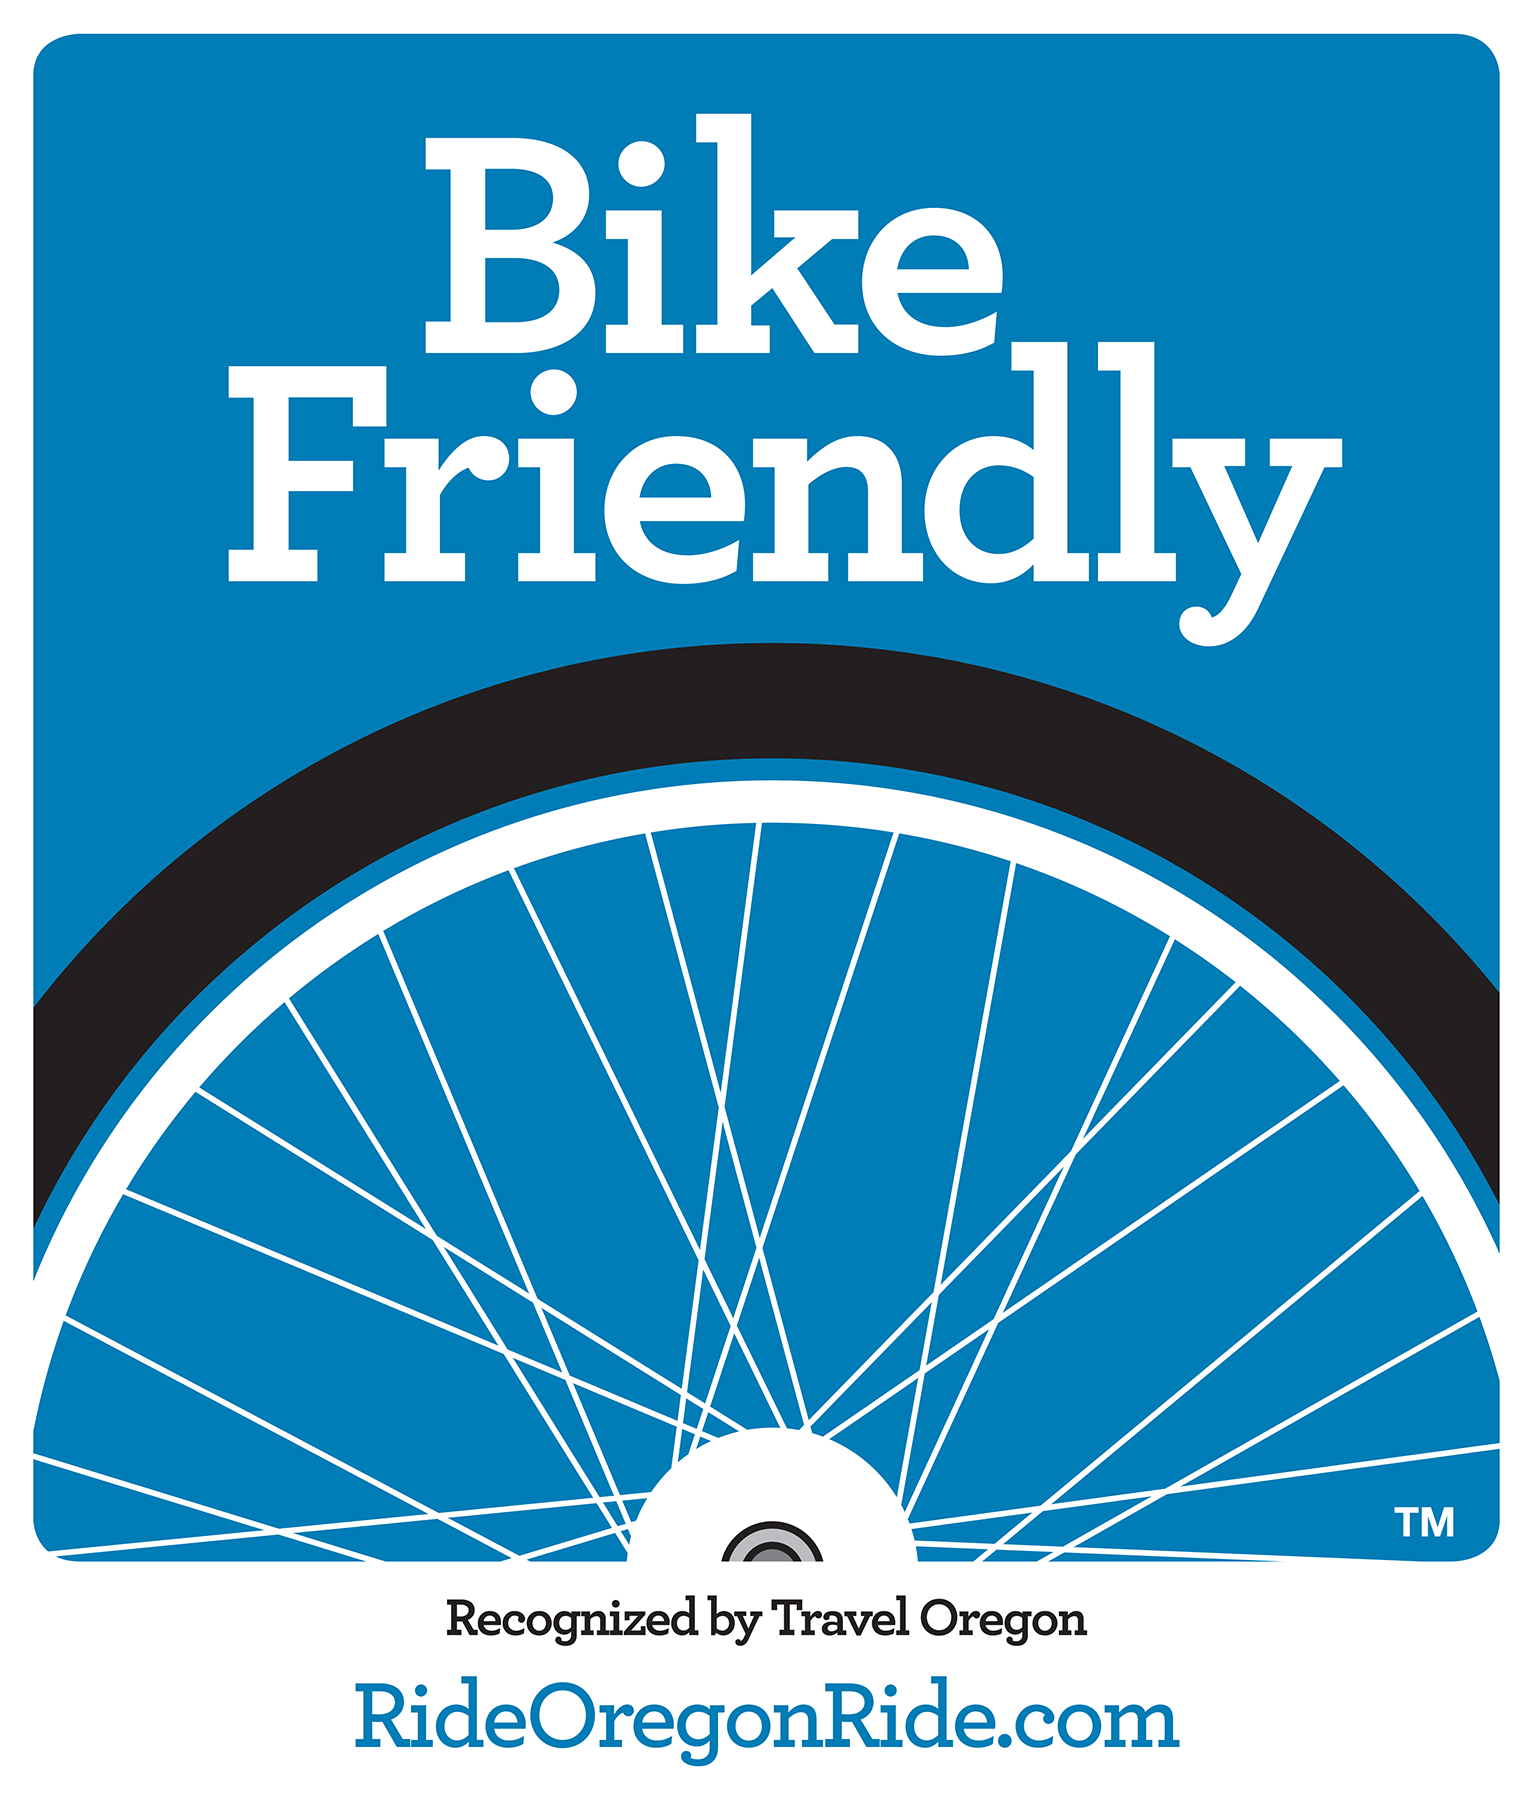 Travel Oregon Recognized The Barlow Room as a Bike Friendly Business